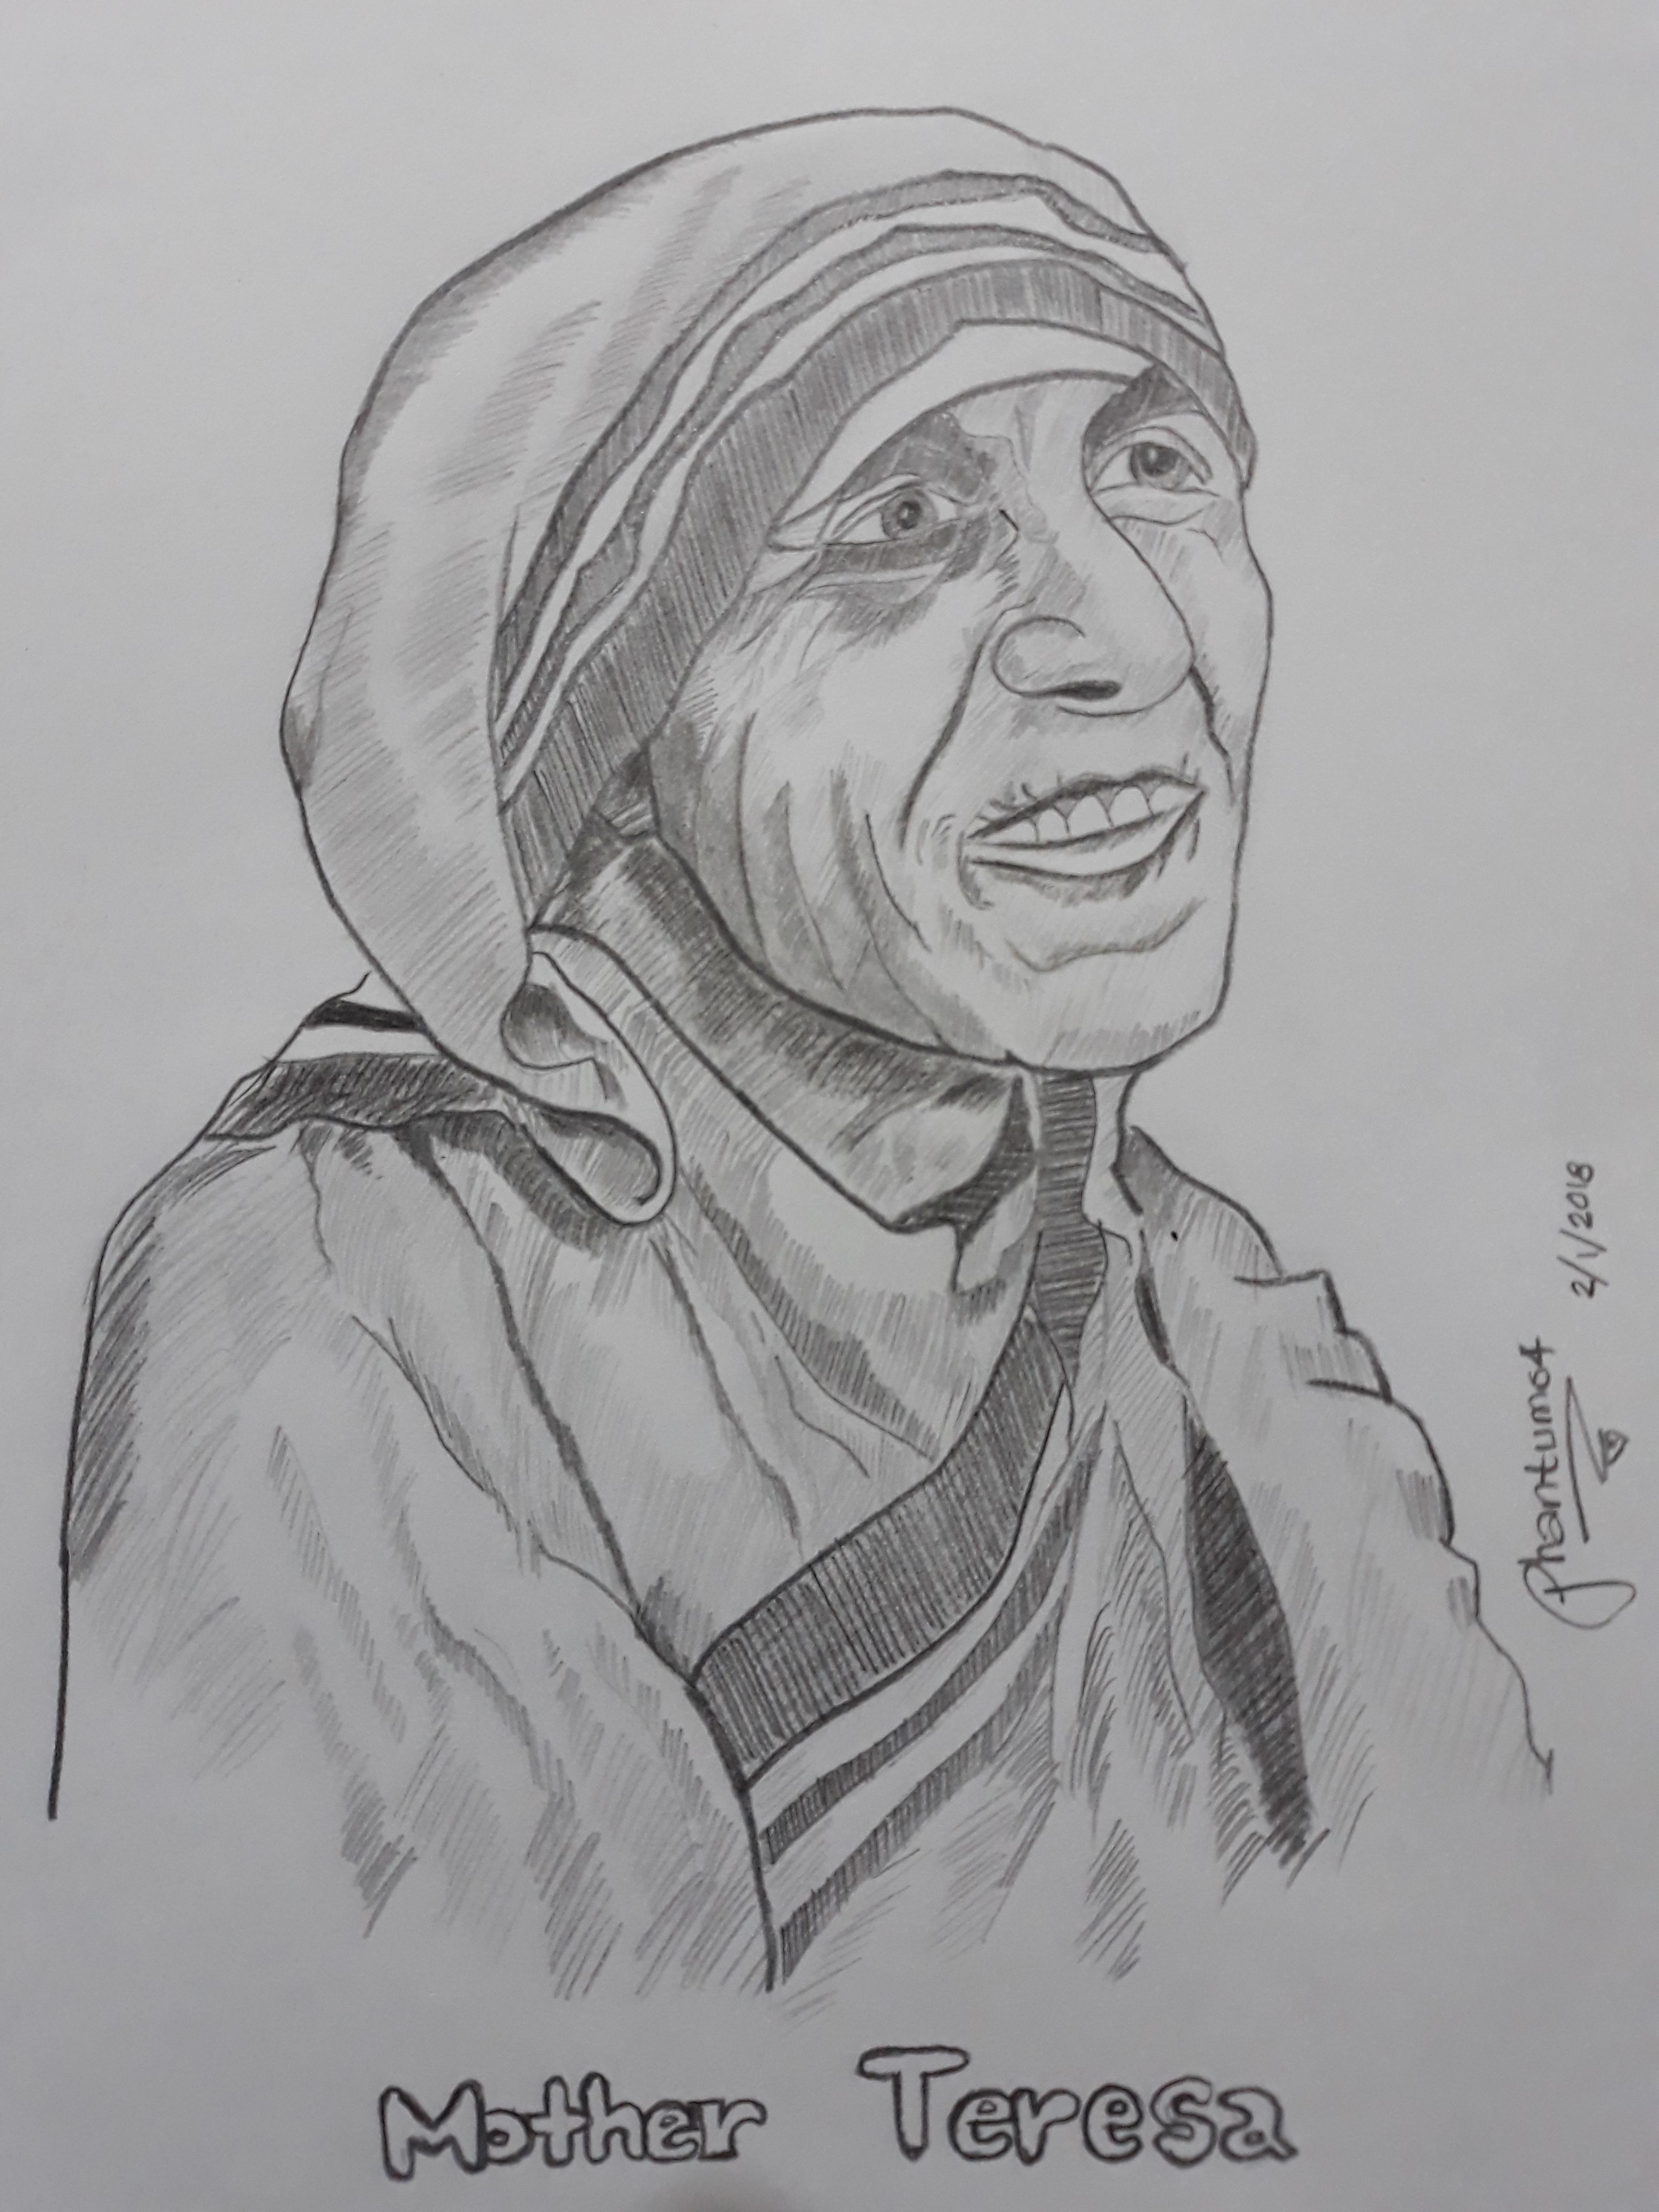 How to draw Mother Teresa Face pencil drawing step by step | Pencil drawing  images, Mothers day drawings, Face pencil drawing